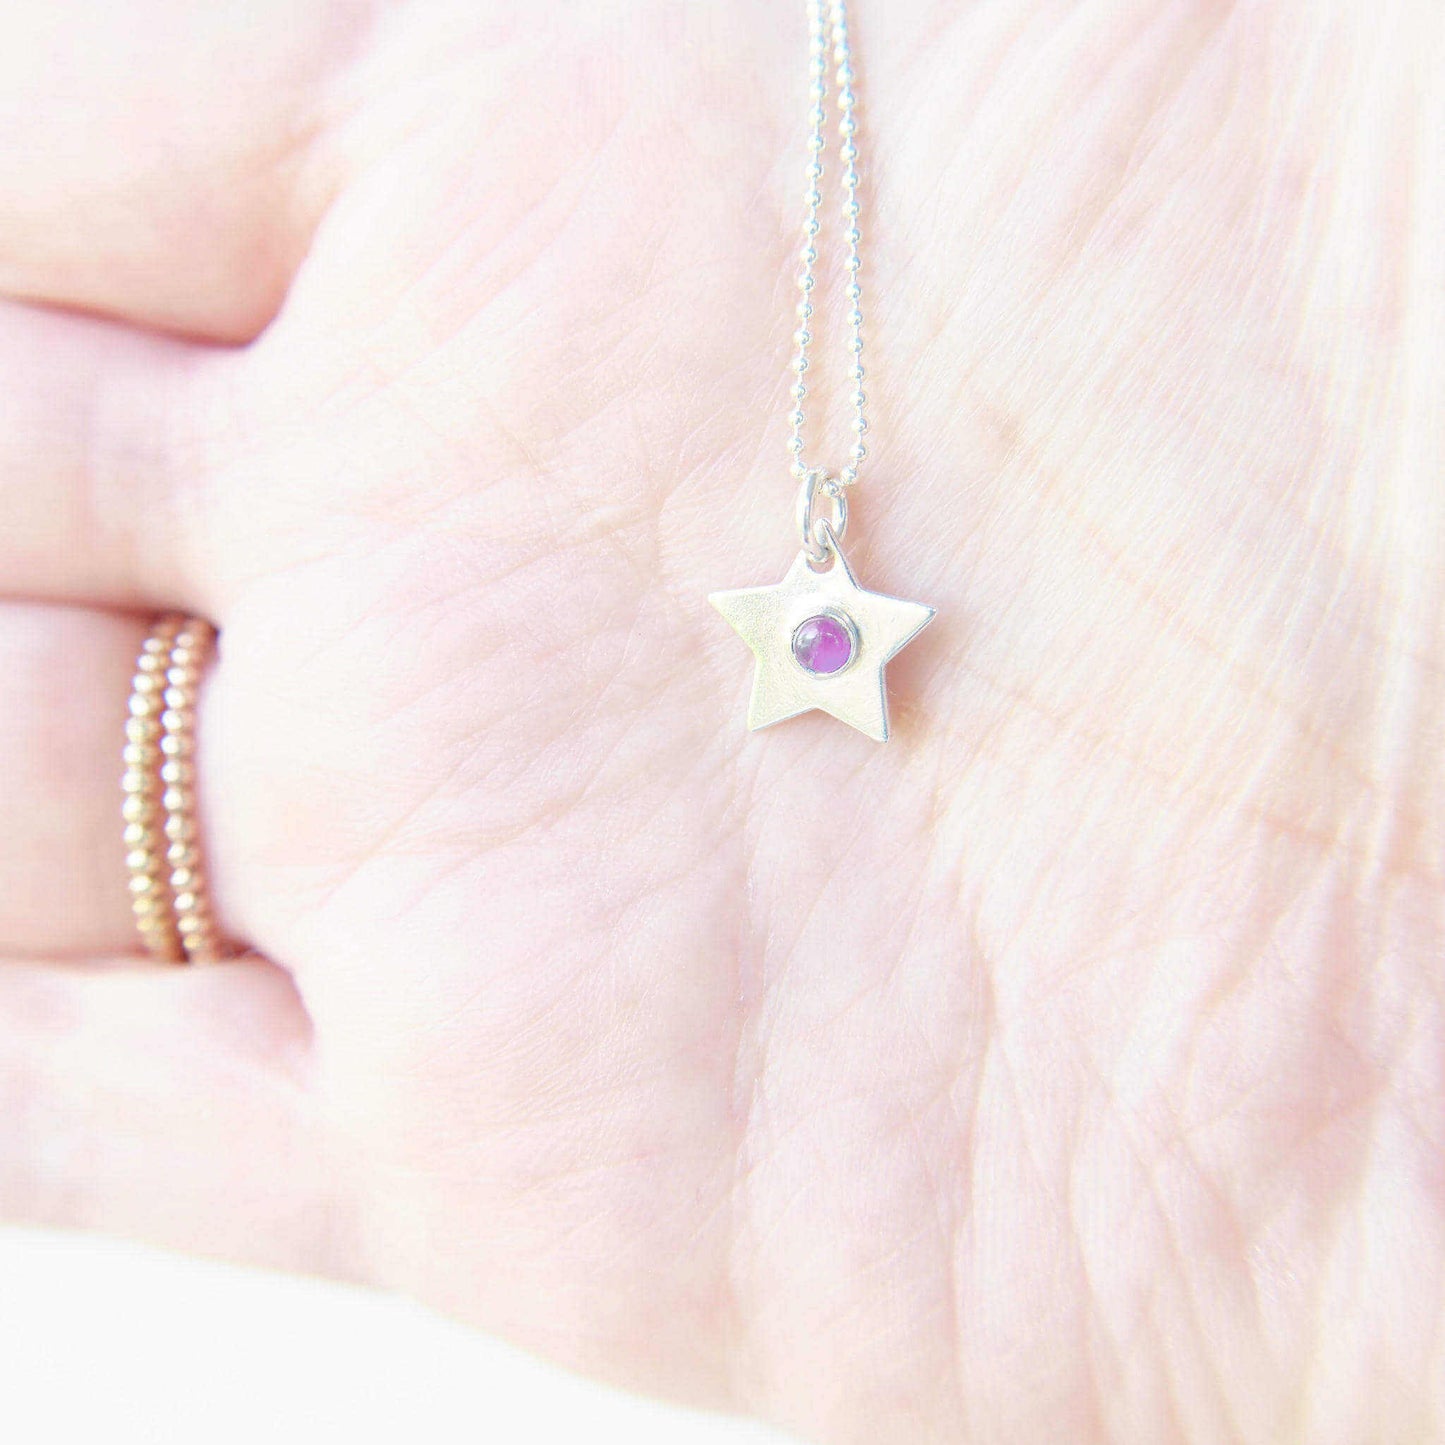 Small Silver Star pendant with purple amethyst centre held in hand to show scale. It measures 12mm in size and is handmade in Scotland by Maram Jewellery